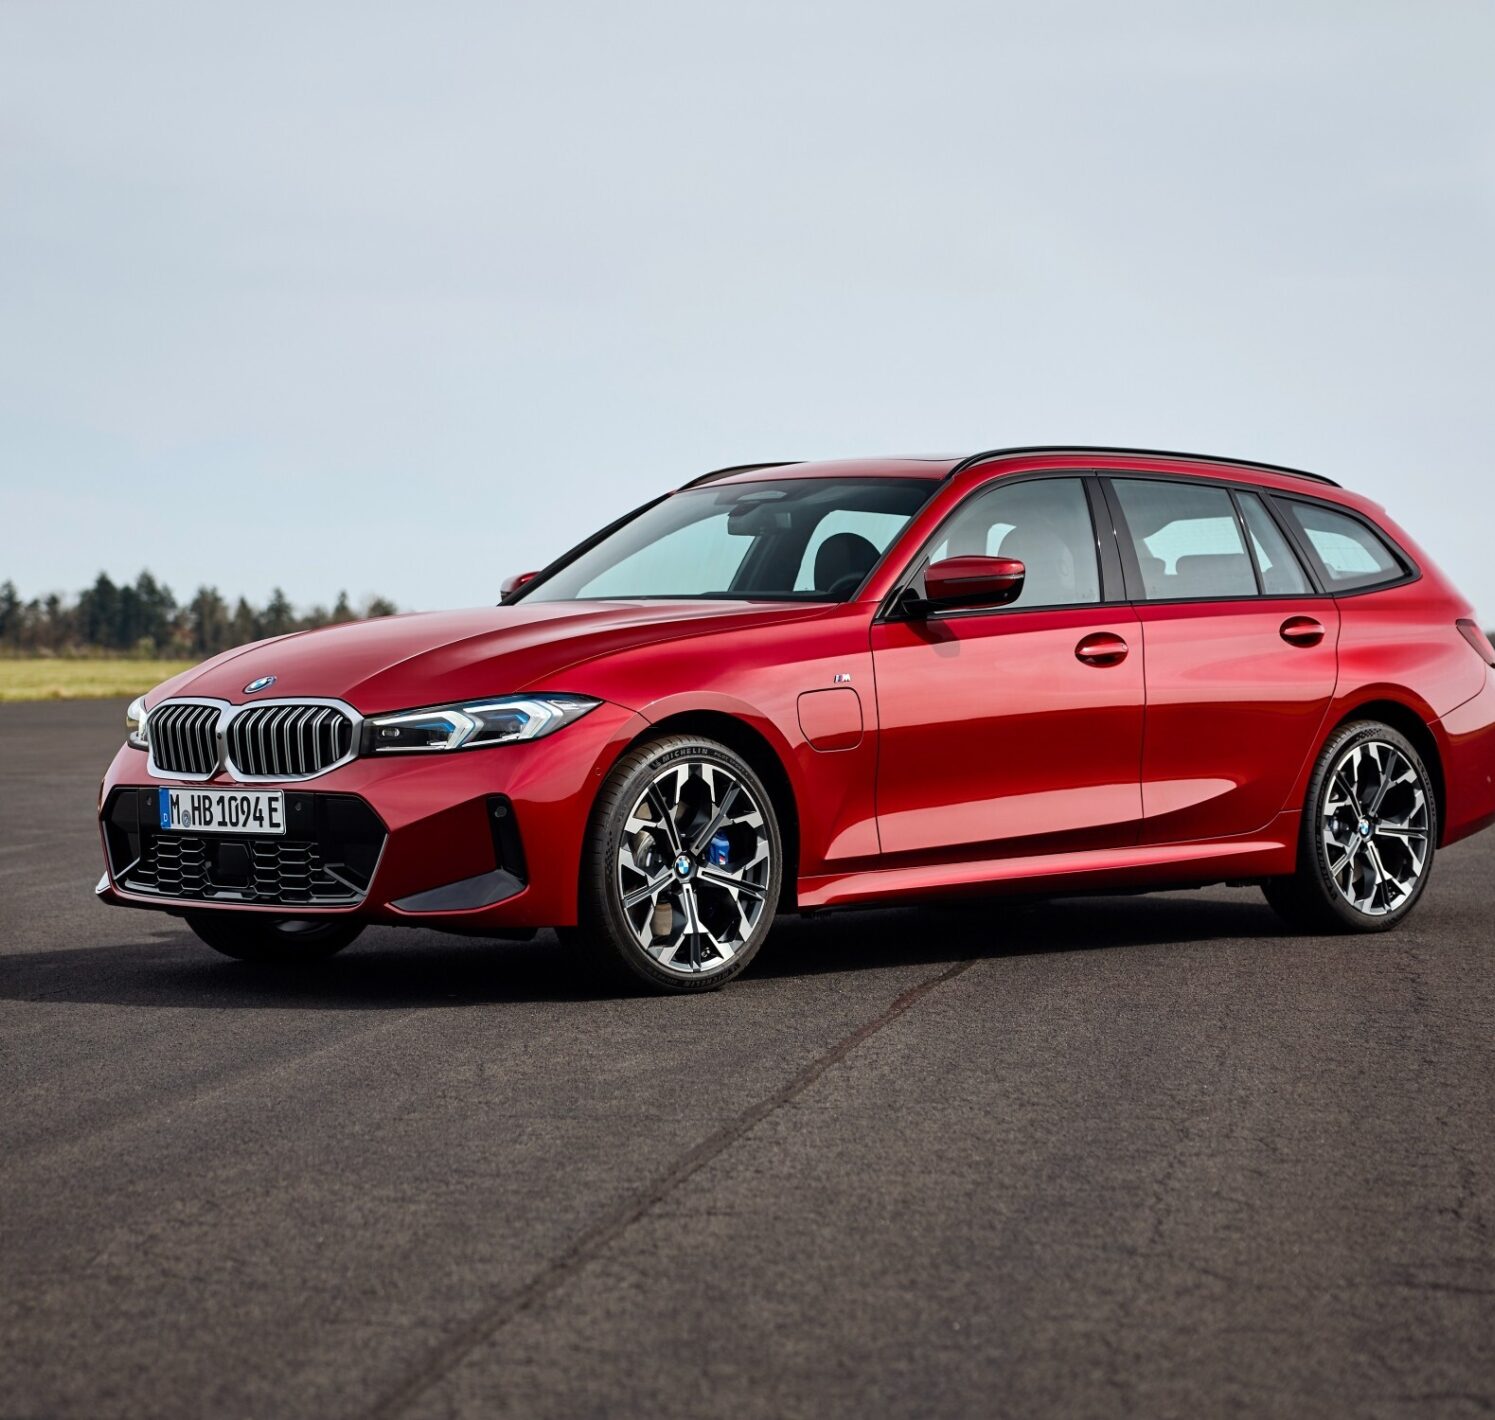 https://autofilter.sk/assets/images/rad-3-touring/gallery/P90549658_lowRes_the-new-bmw-330e-tou.jpg - obrazok